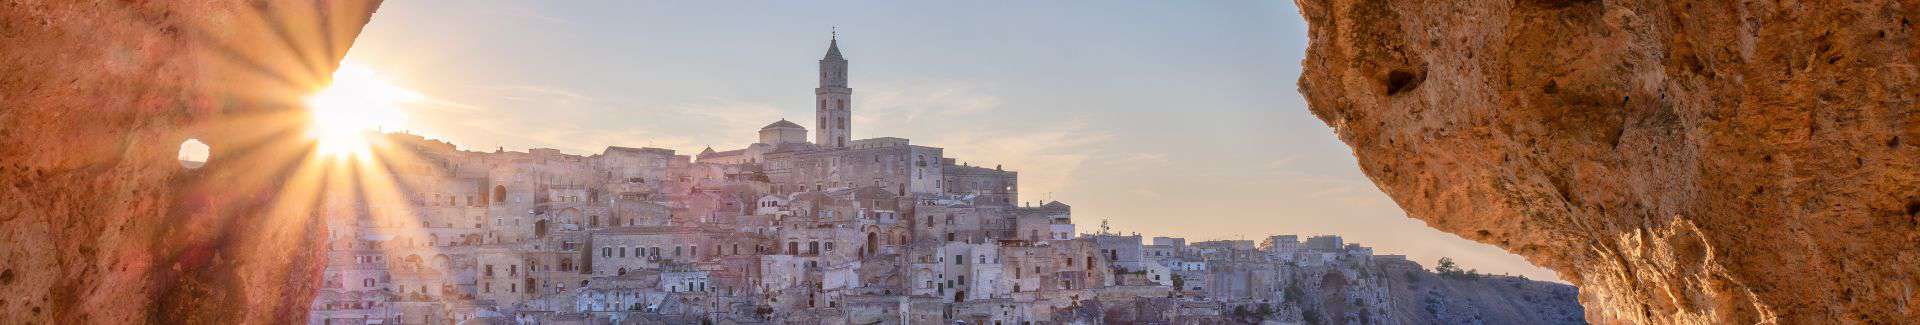 The city of Matera, Italy at sunrise as seen from a Sassi cave.